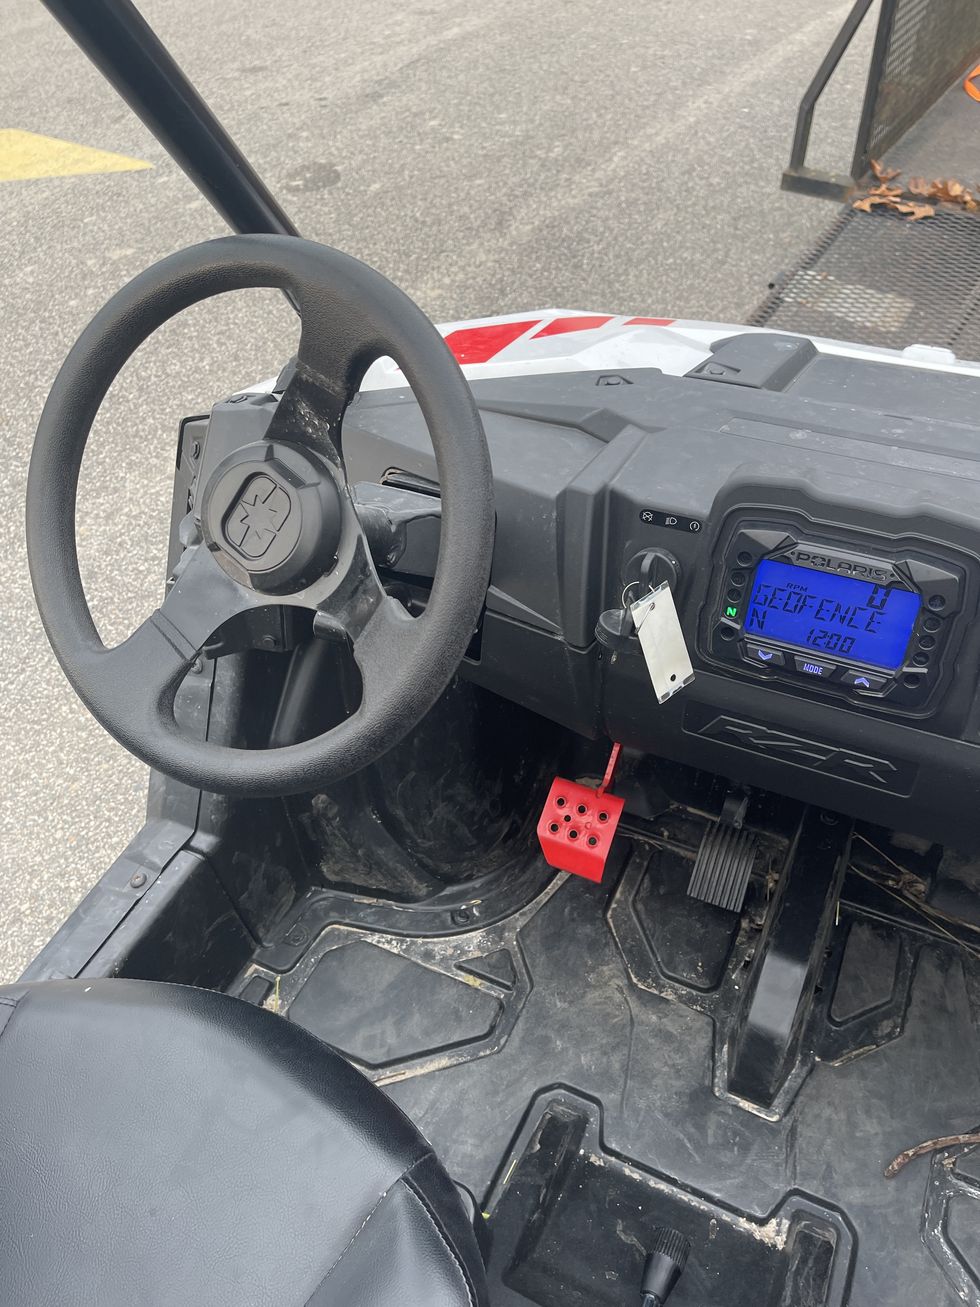 polaris rzr interior view with steering wheel and pedals